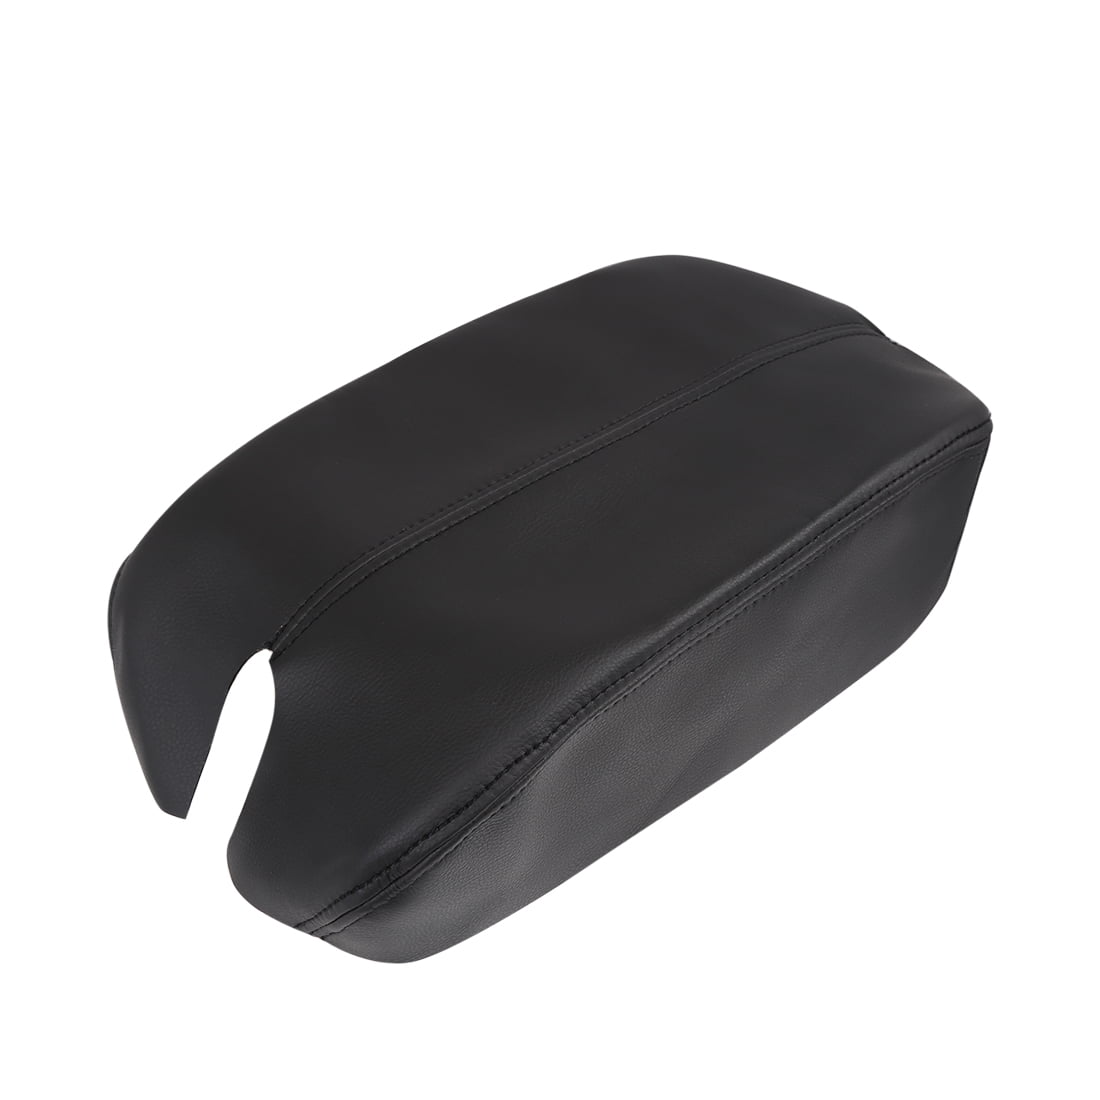 Ezzy Auto Black Leather Console Center Armrest Lid Cover Skin Protector Jacket for Honda Accord 